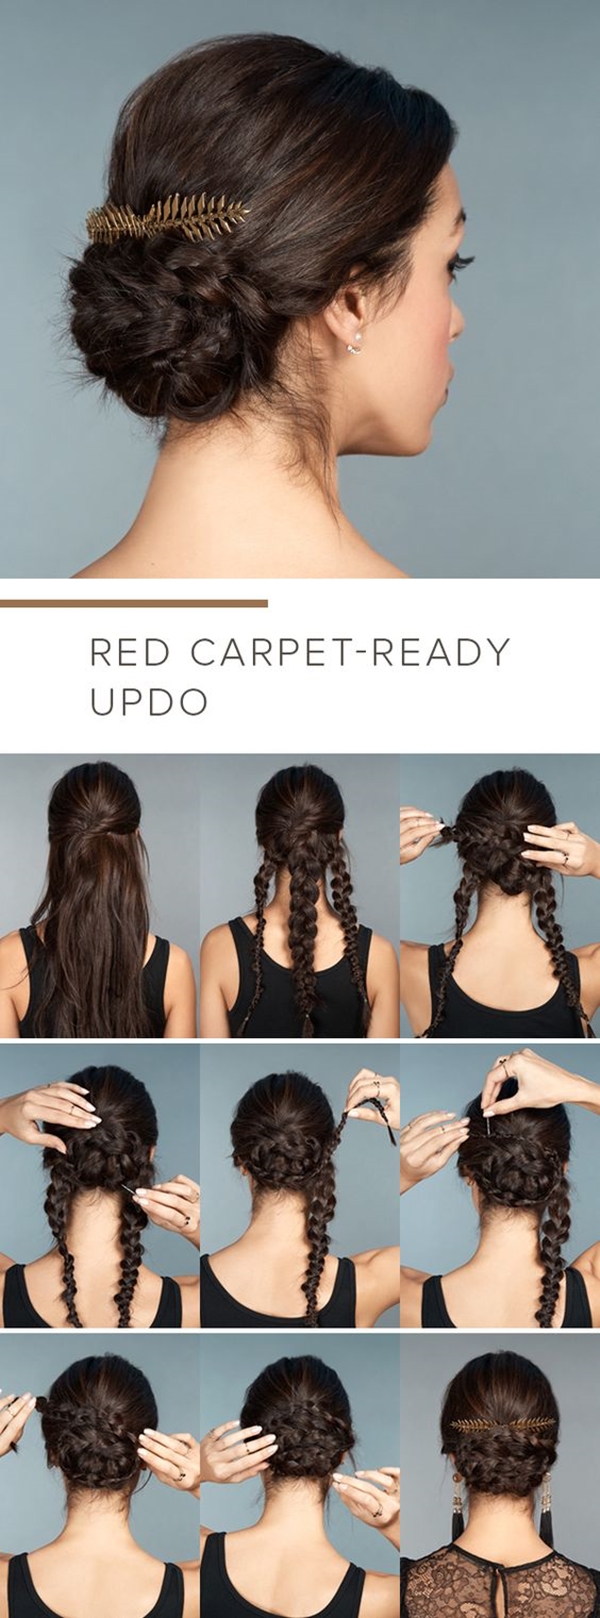 https://www.more.com/beauty/hair/braided-hairstyles/50-fabulous-french-braid-hairstyles-diy